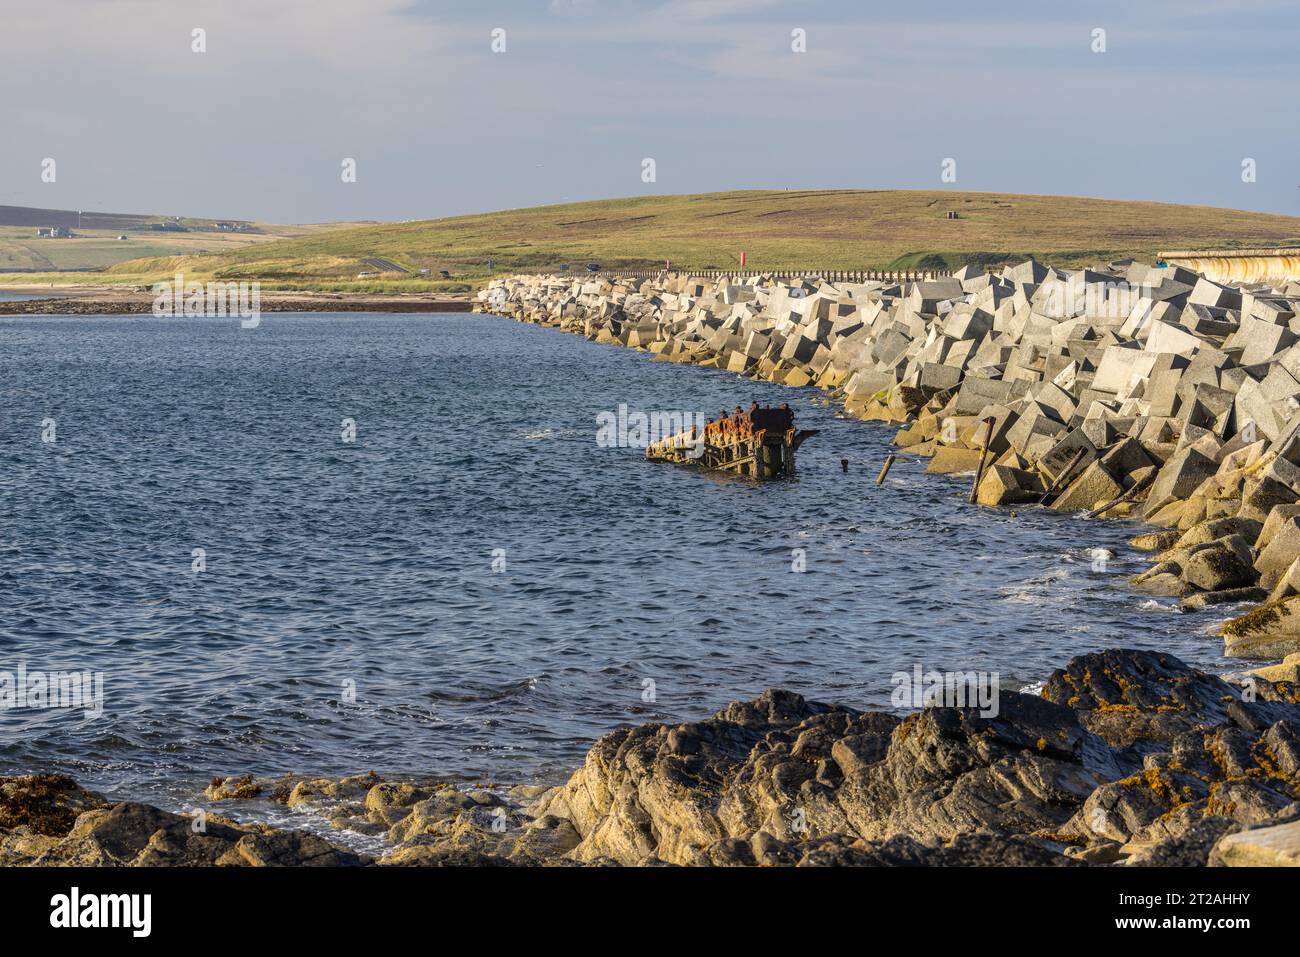 Churchill Barrier 2 and Rusting Sunken Ship from Lambs Holm, Scapa Flow, Orkney Islands, Scotland, UK Stock Photo